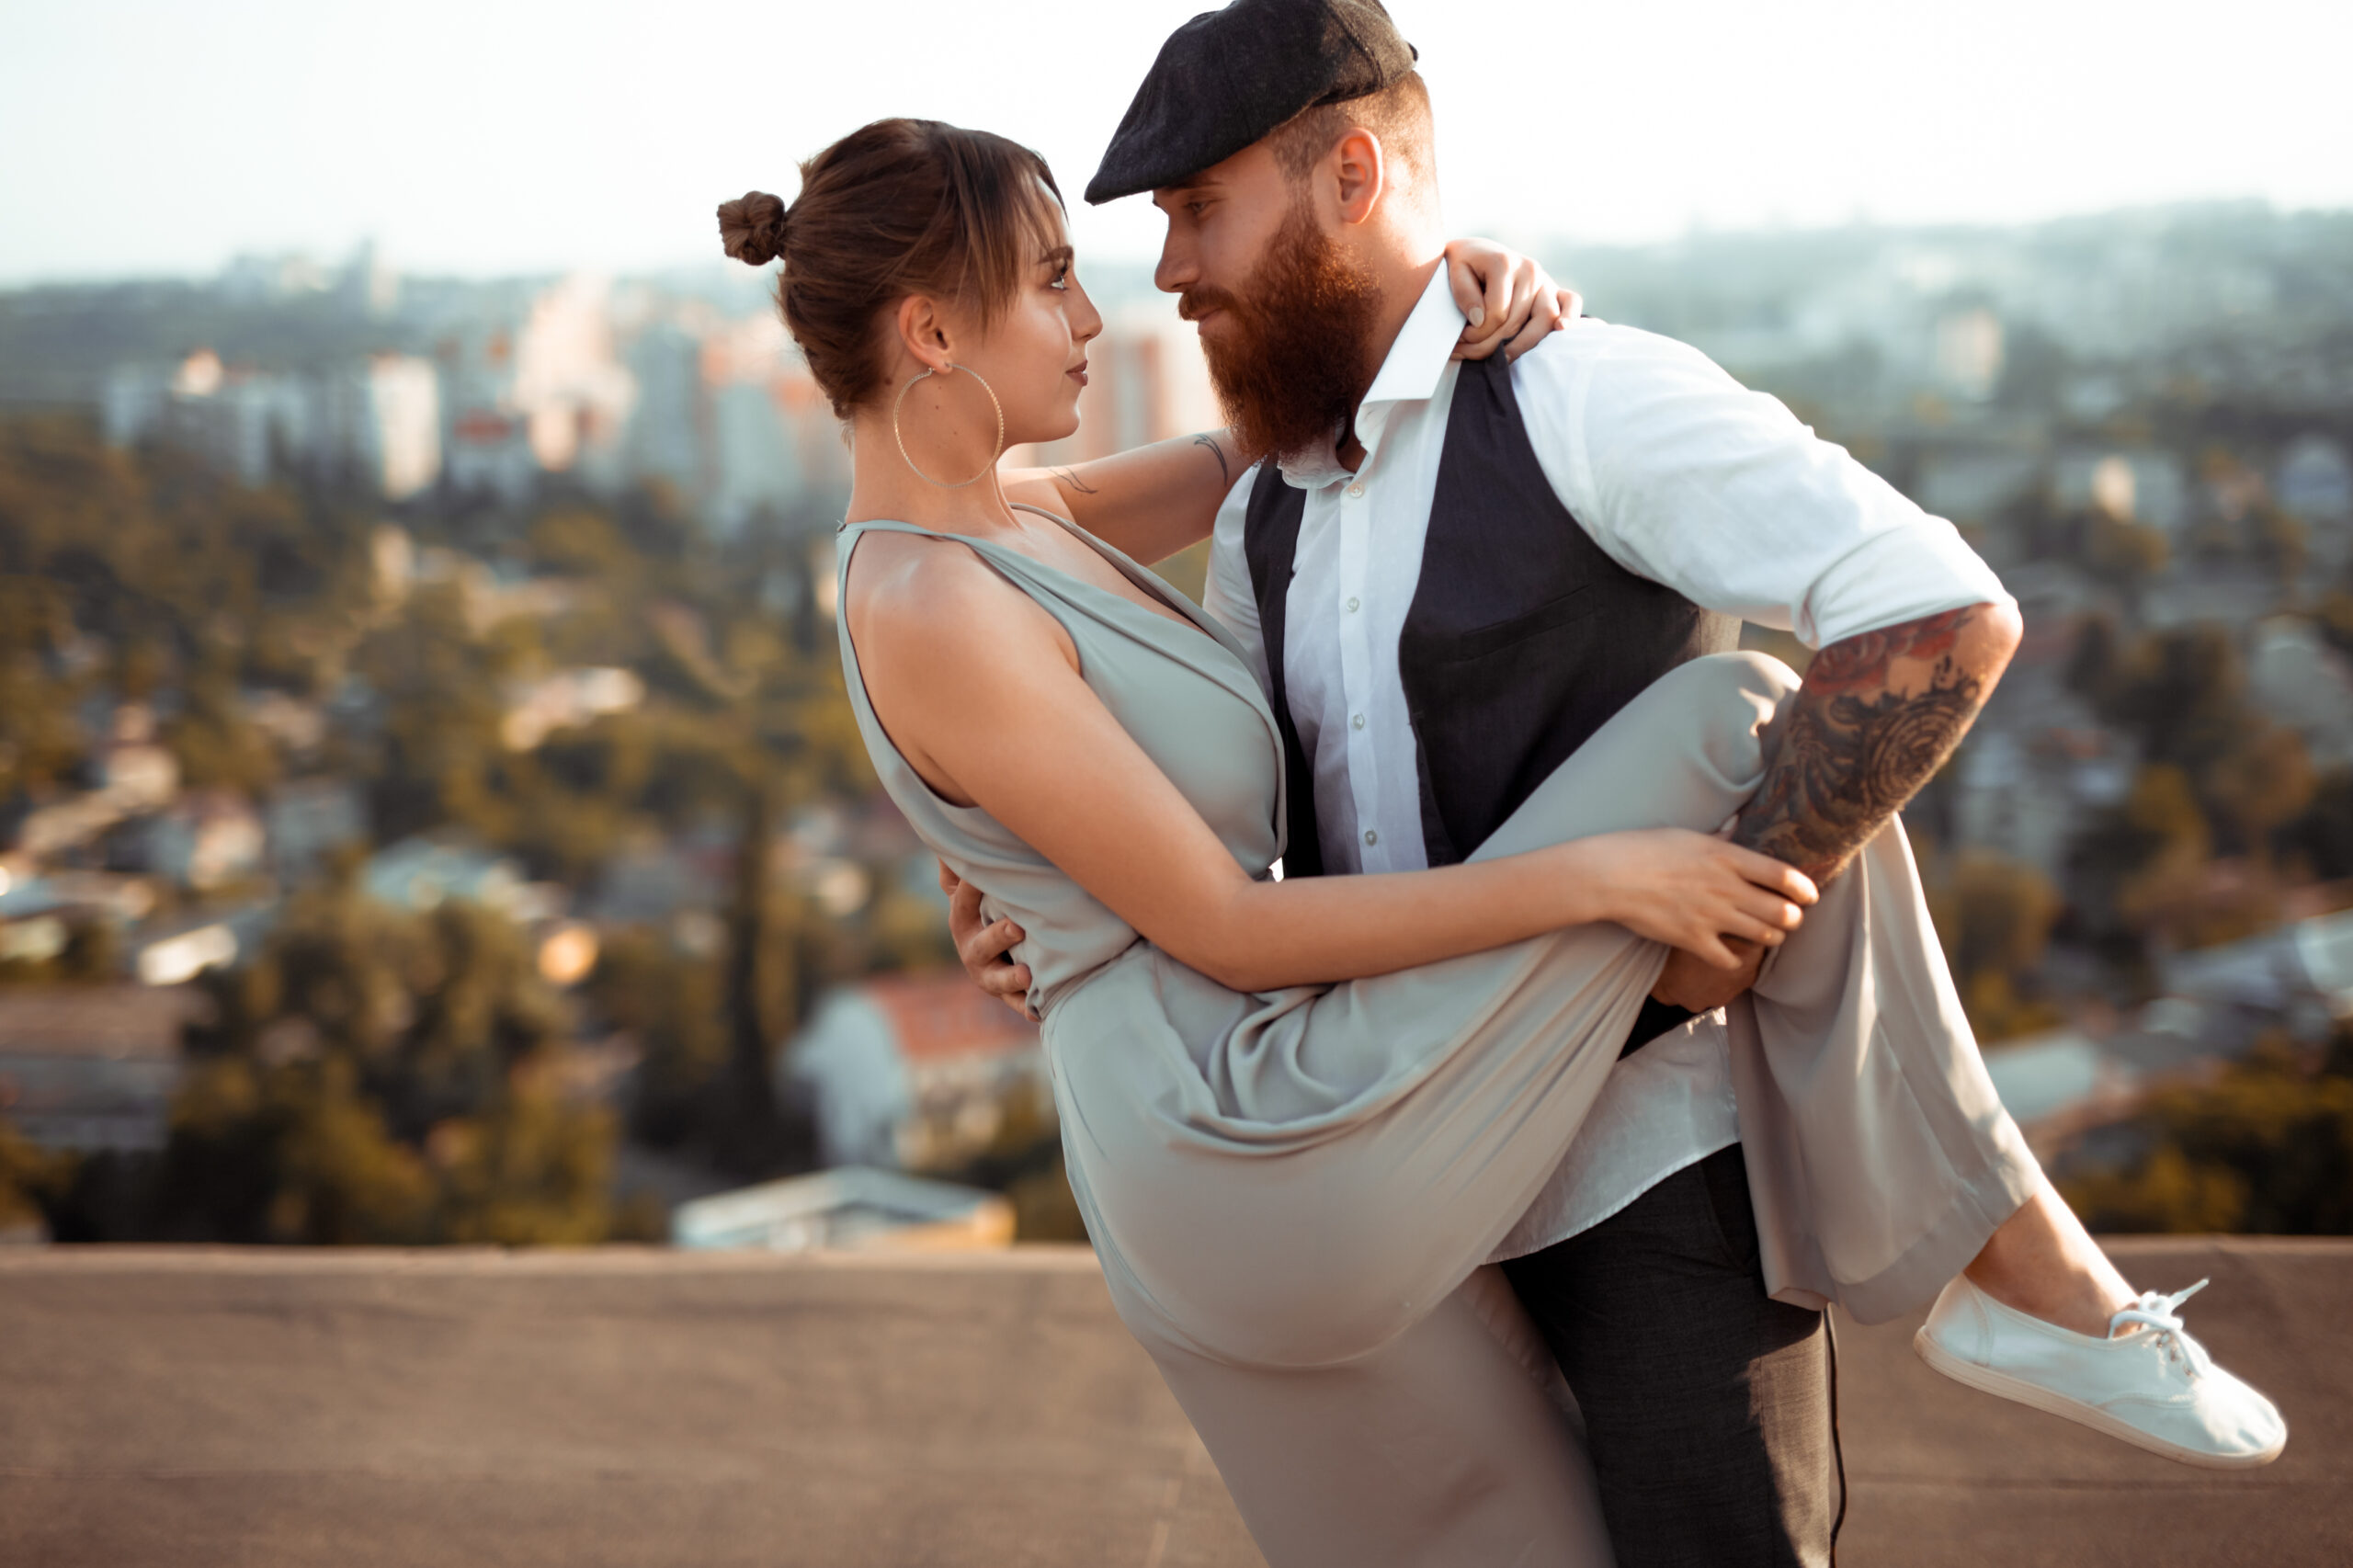 Trendy bearded hipster with tattooed arm hugging young girlfriend while dancing during romantic date on rooftop